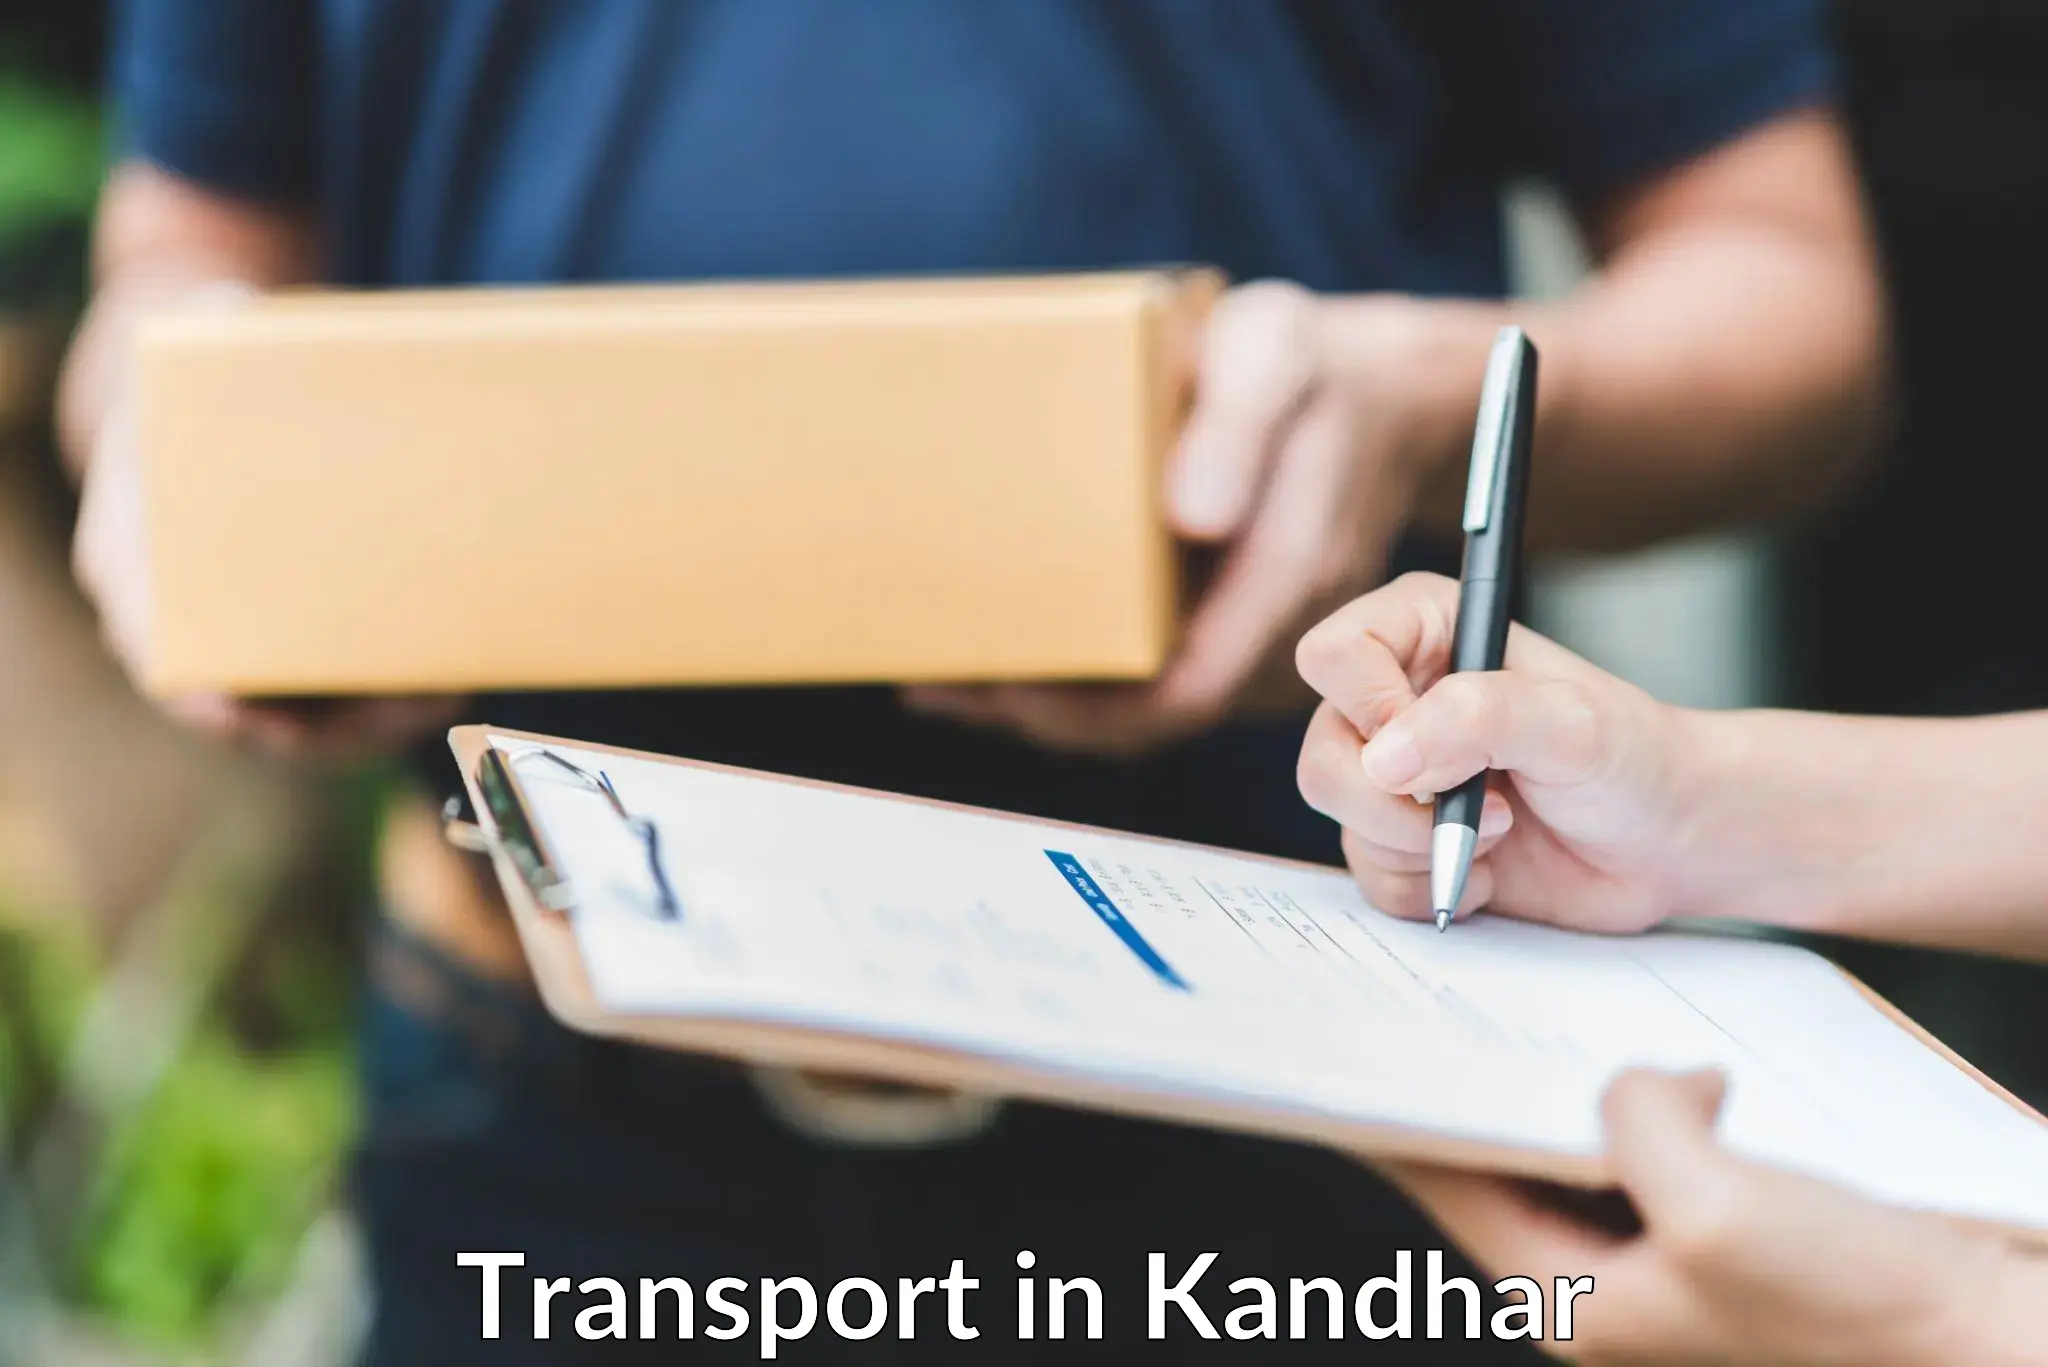 Nearby transport service in Kandhar